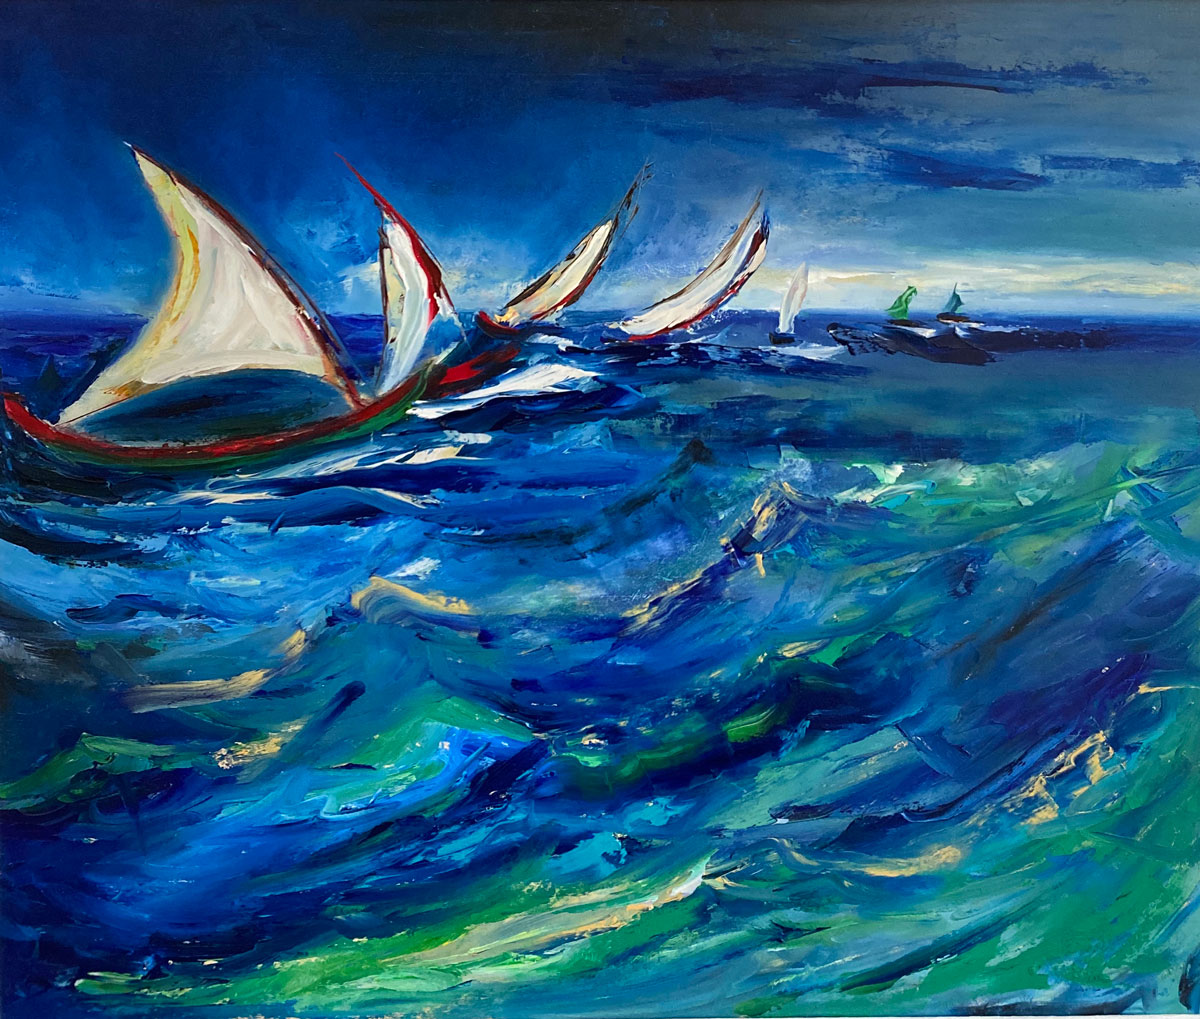 RIDING THE WAVES - after Van Gogh